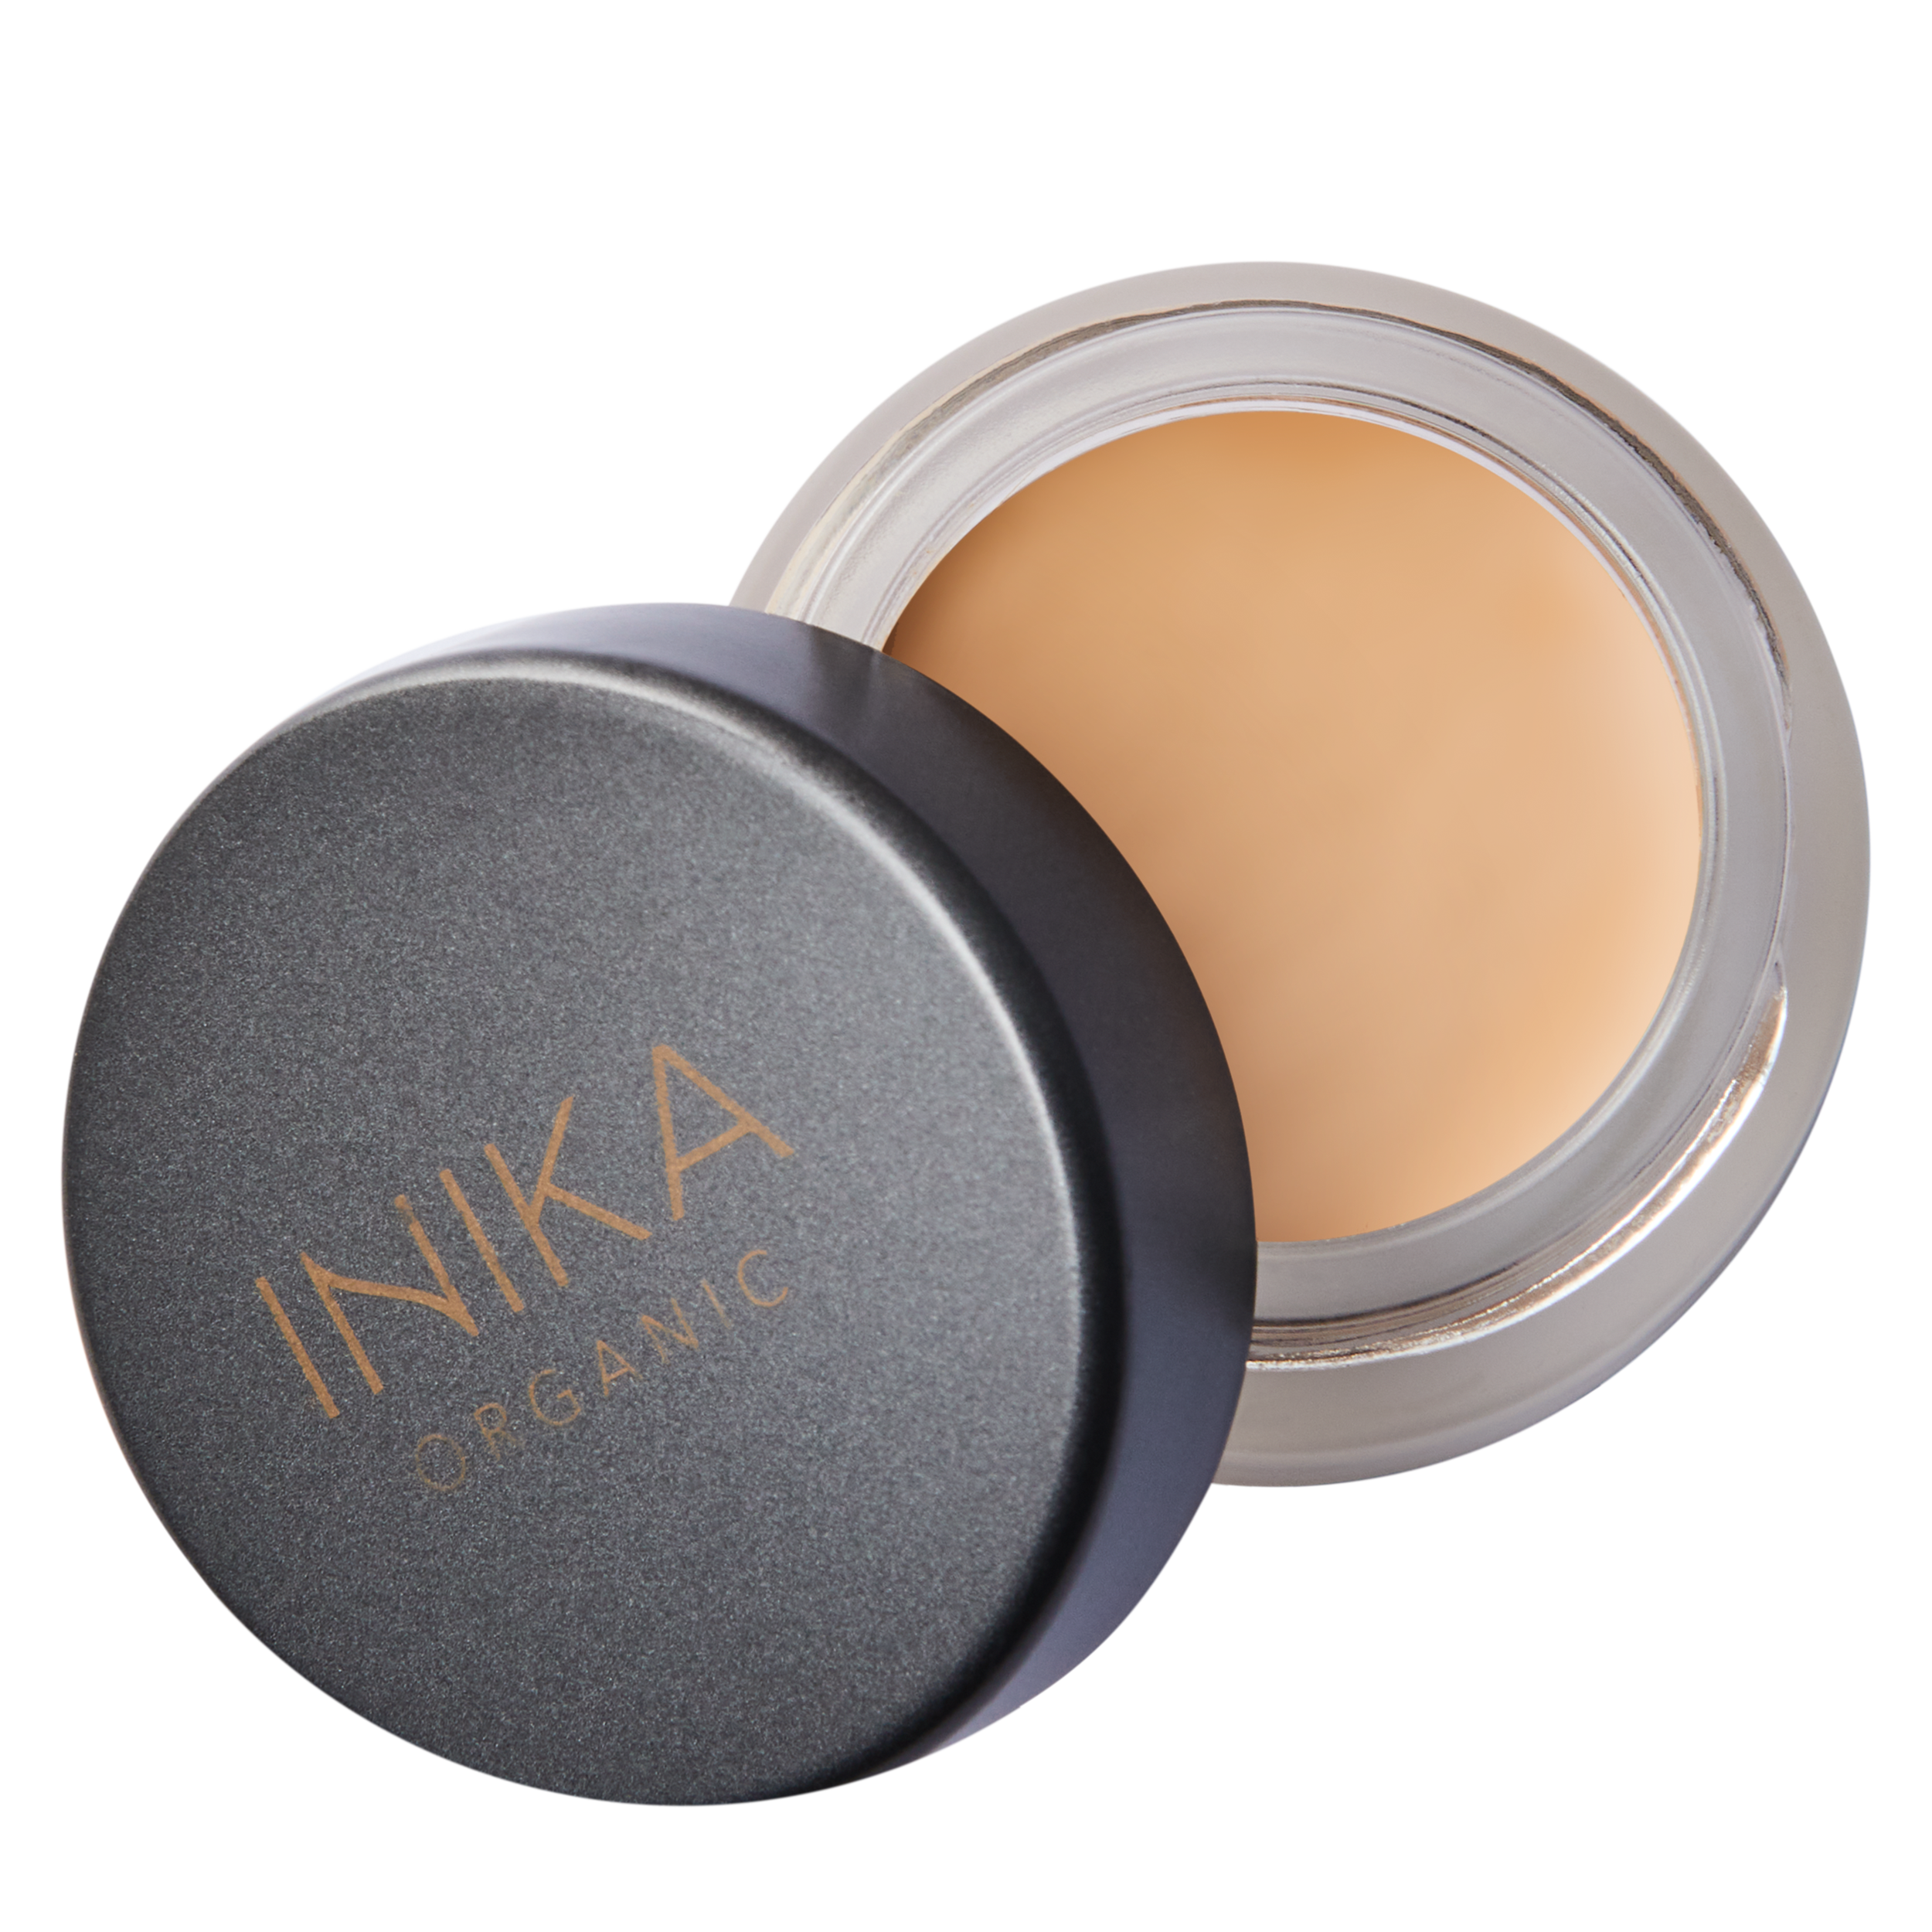 INIKA Organic Full Coverage Concealer in Shell